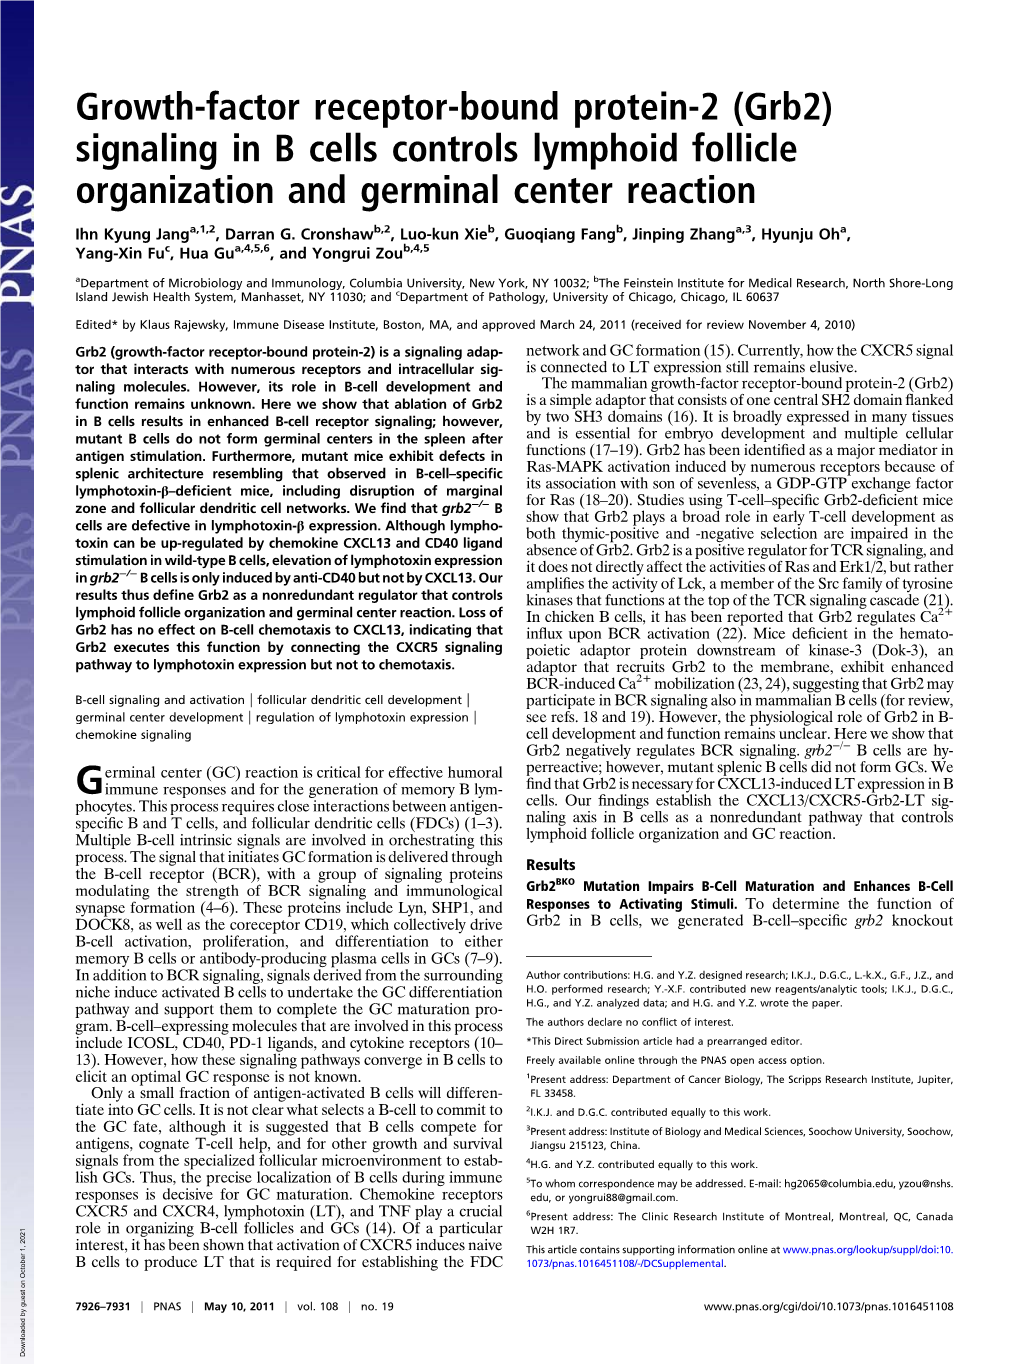 Growth-Factor Receptor-Bound Protein-2 (Grb2) Signaling in B Cells Controls Lymphoid Follicle Organization and Germinal Center Reaction